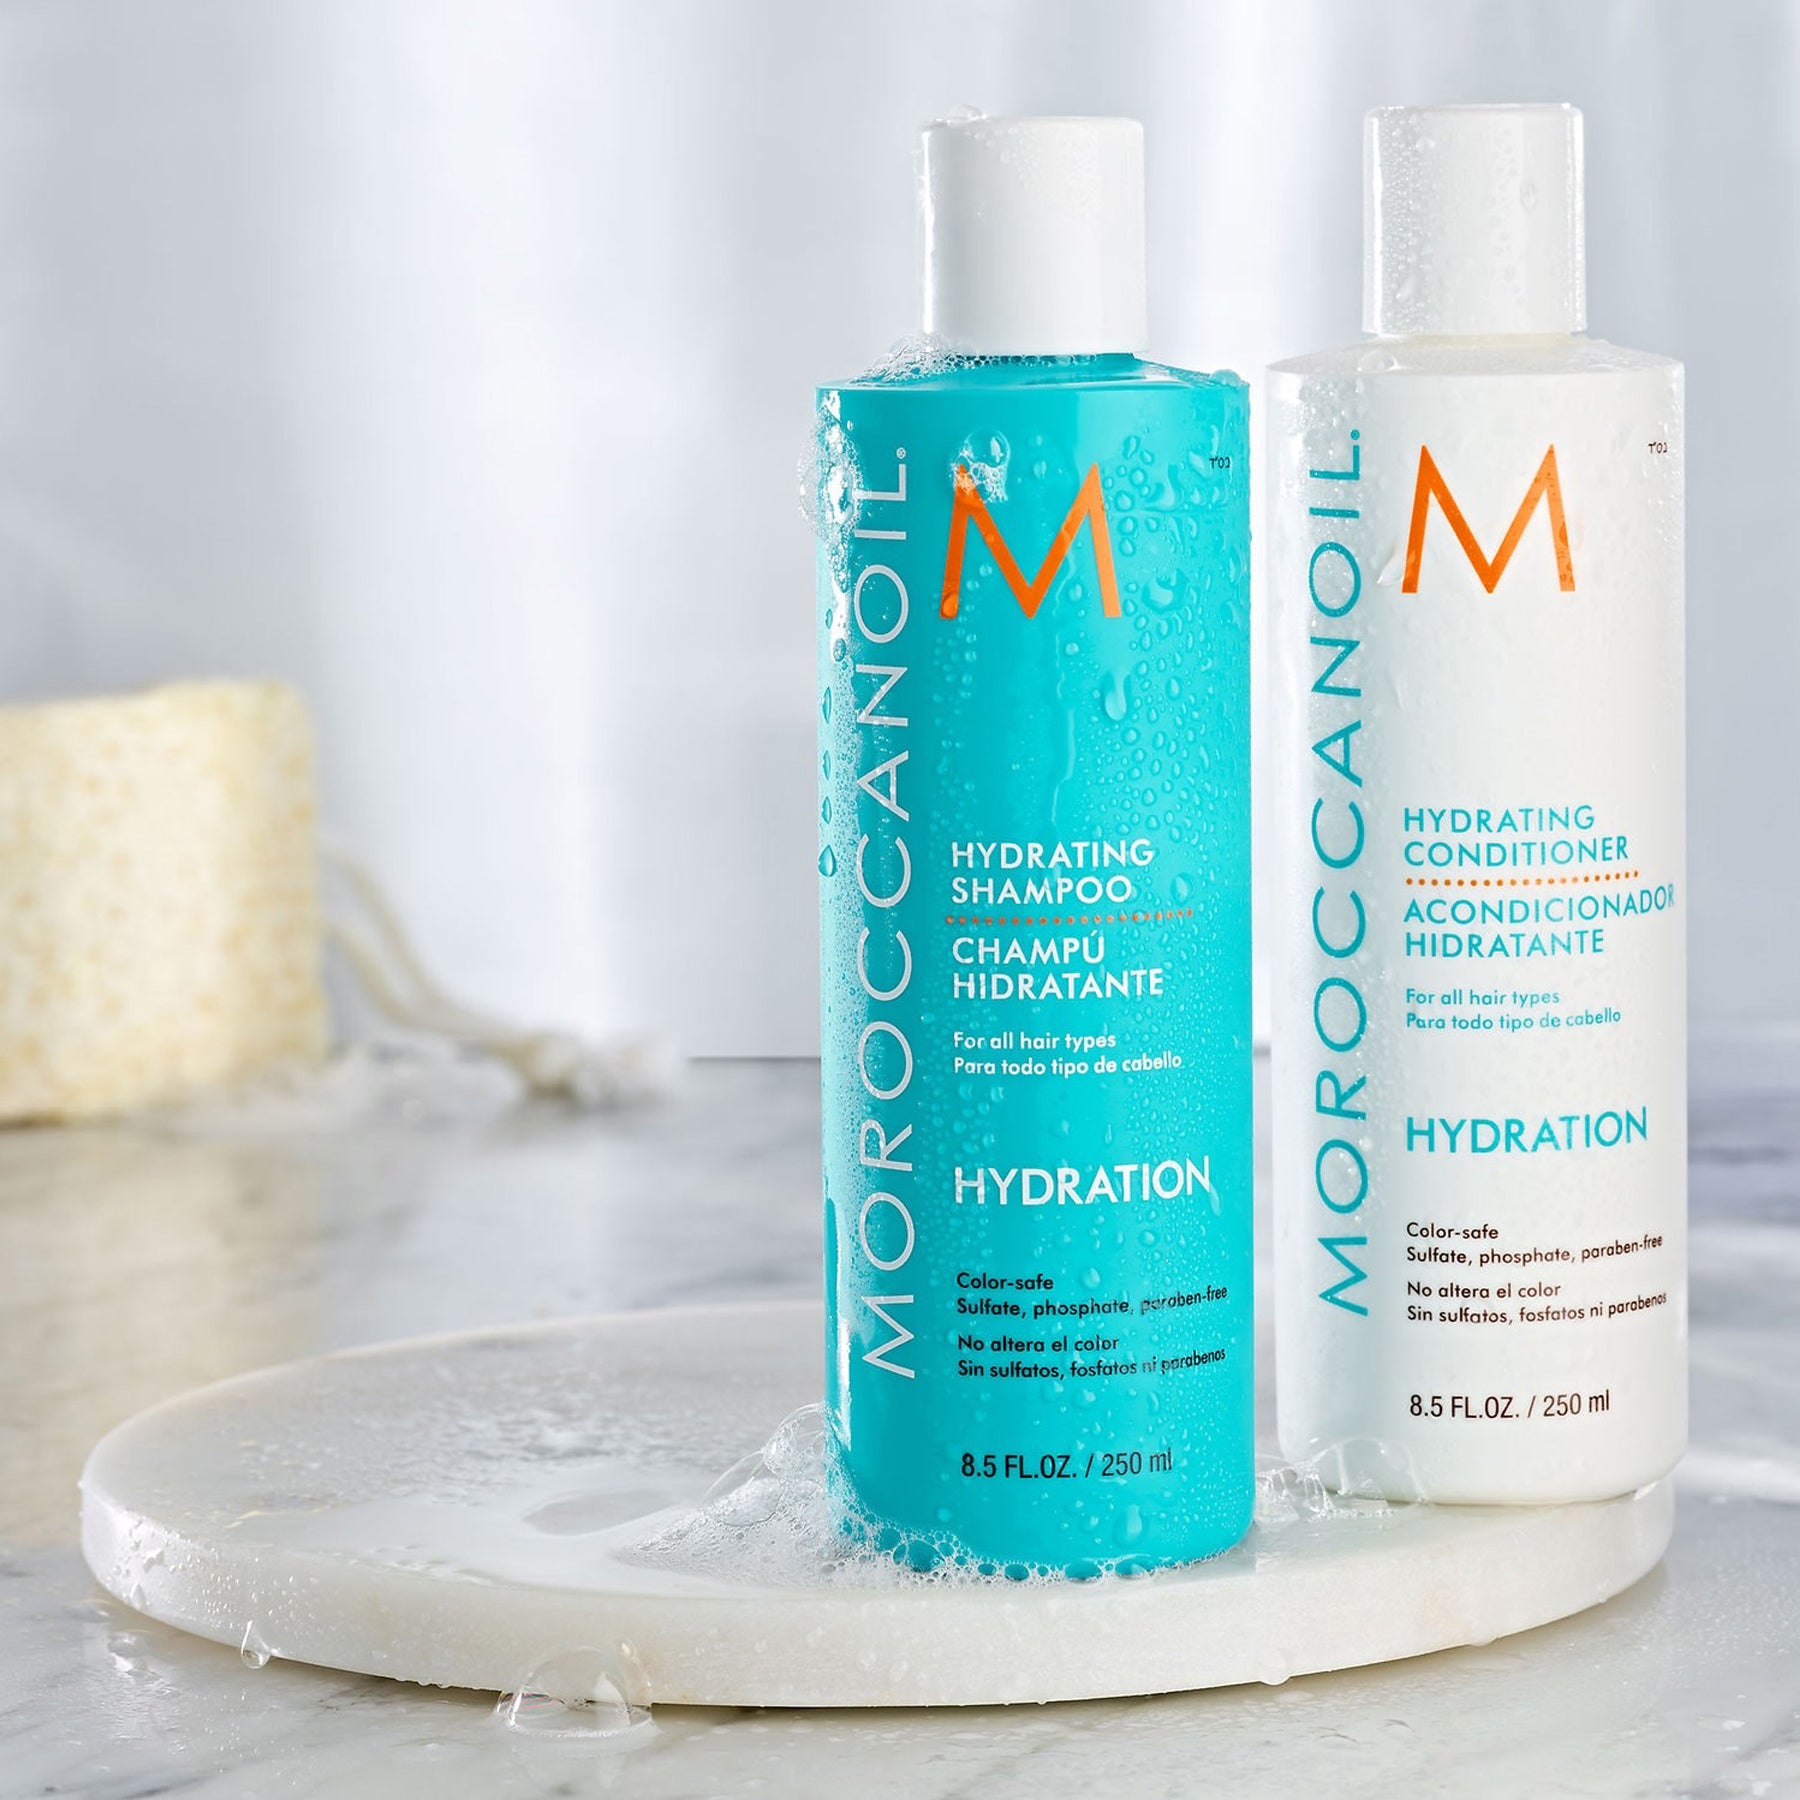 Moroccanoil Hydrating Shampoo and Conditioner, 8.5 Fluid Ounces / 250 Milliliters.